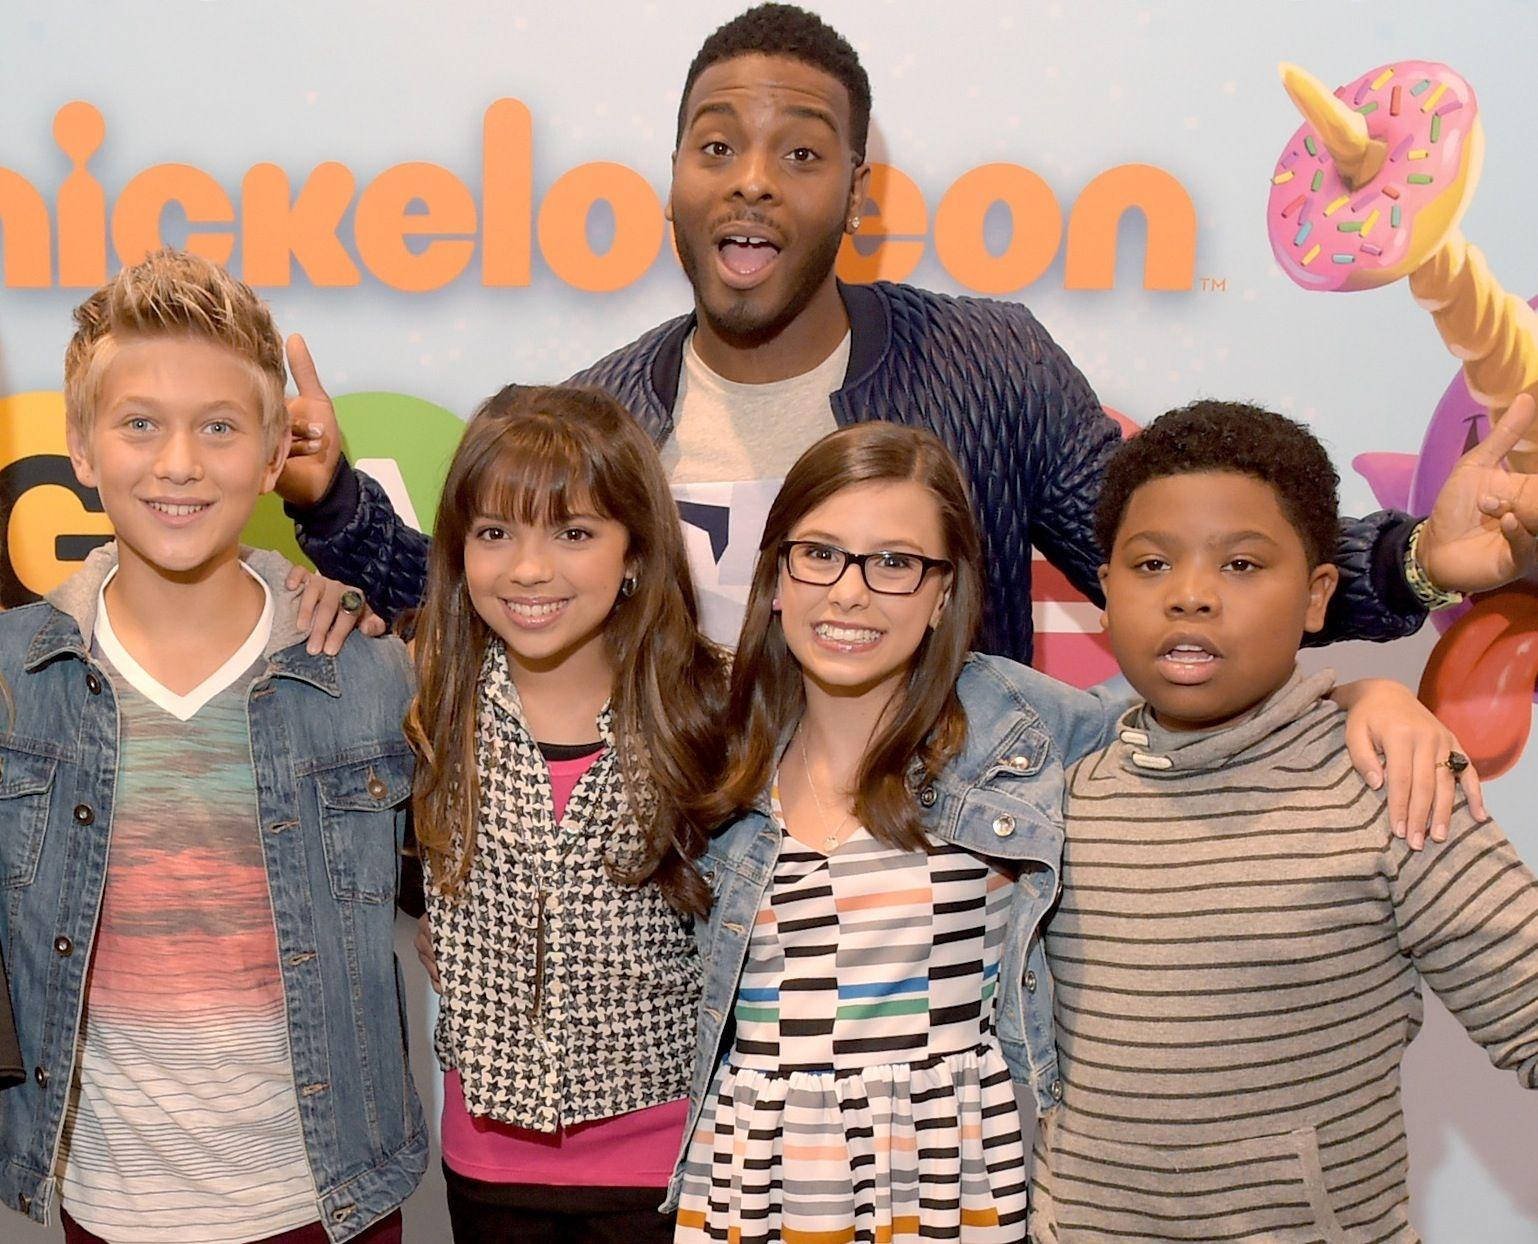 Game Shakers Family On Photoshoot Background